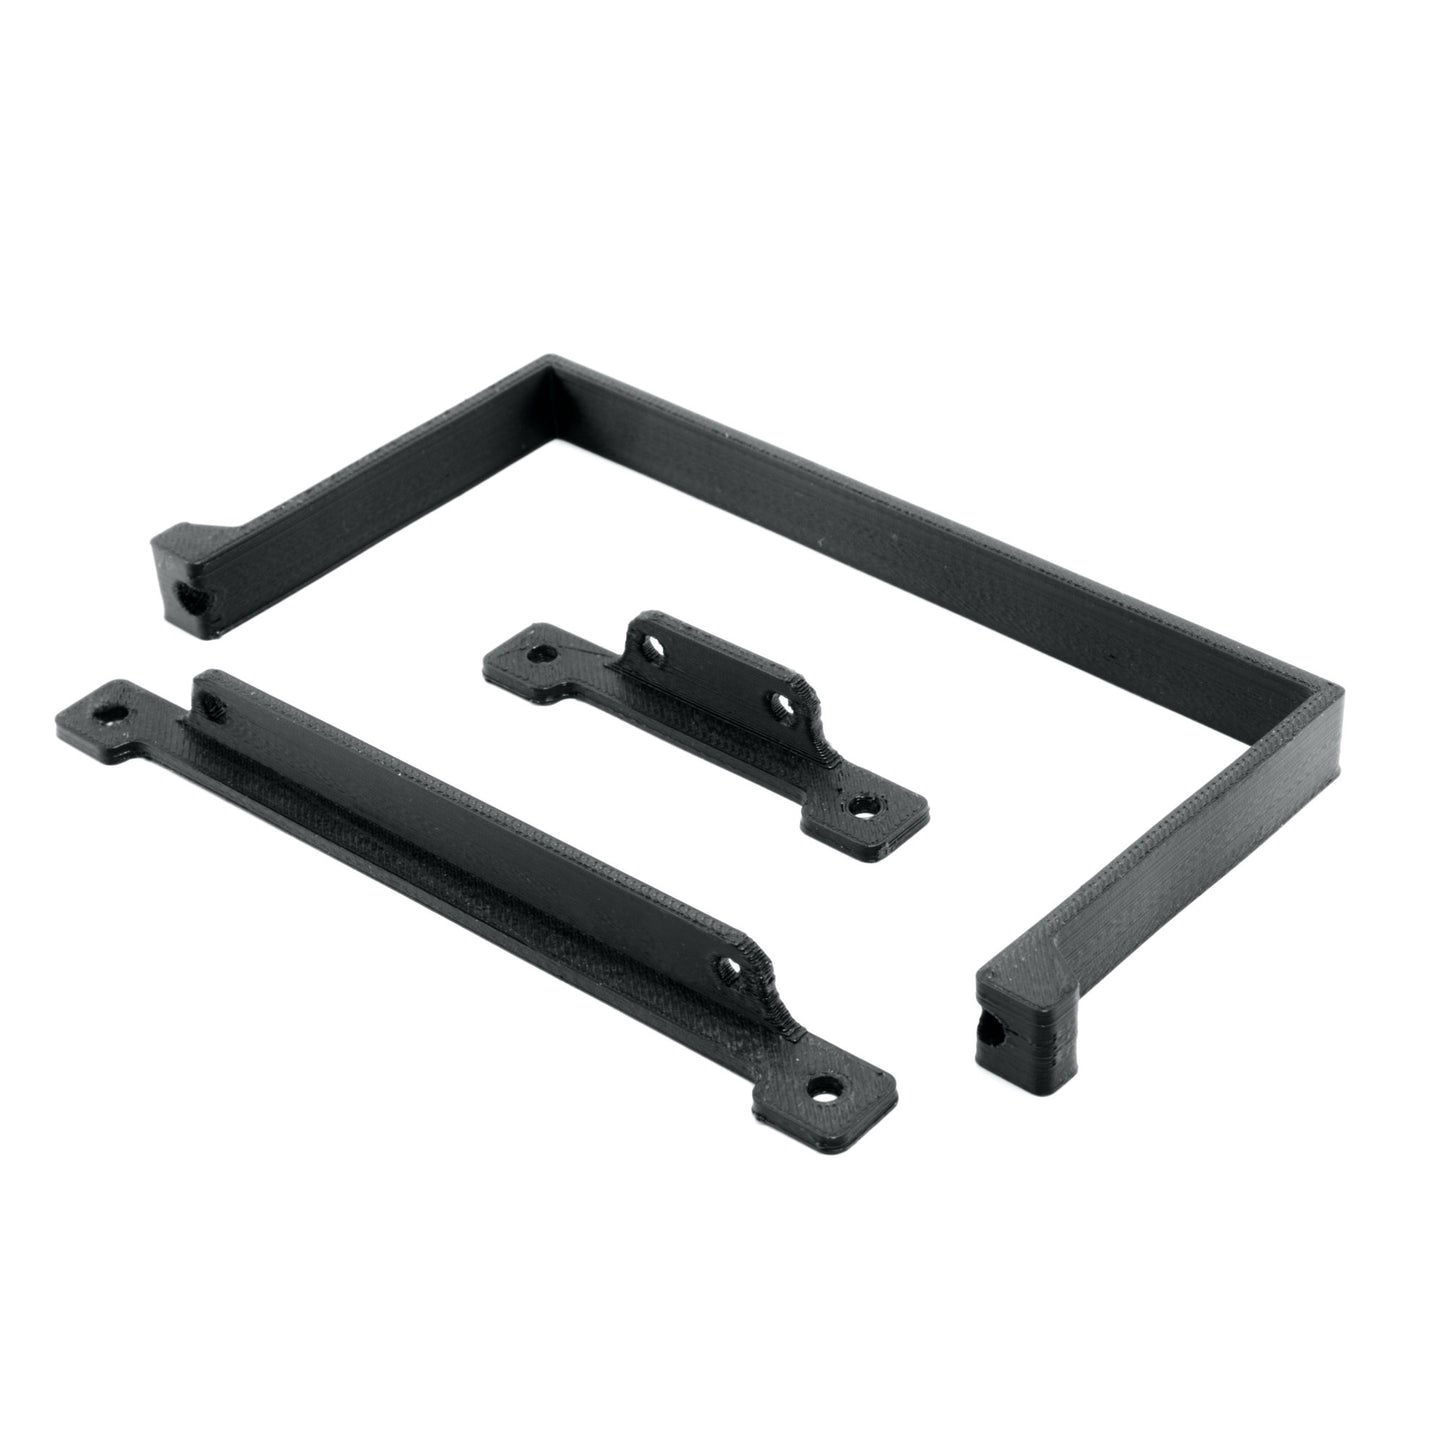 SFX Power Supply Mounting Bracket for DIY projects, LED lighting, 3D Printers